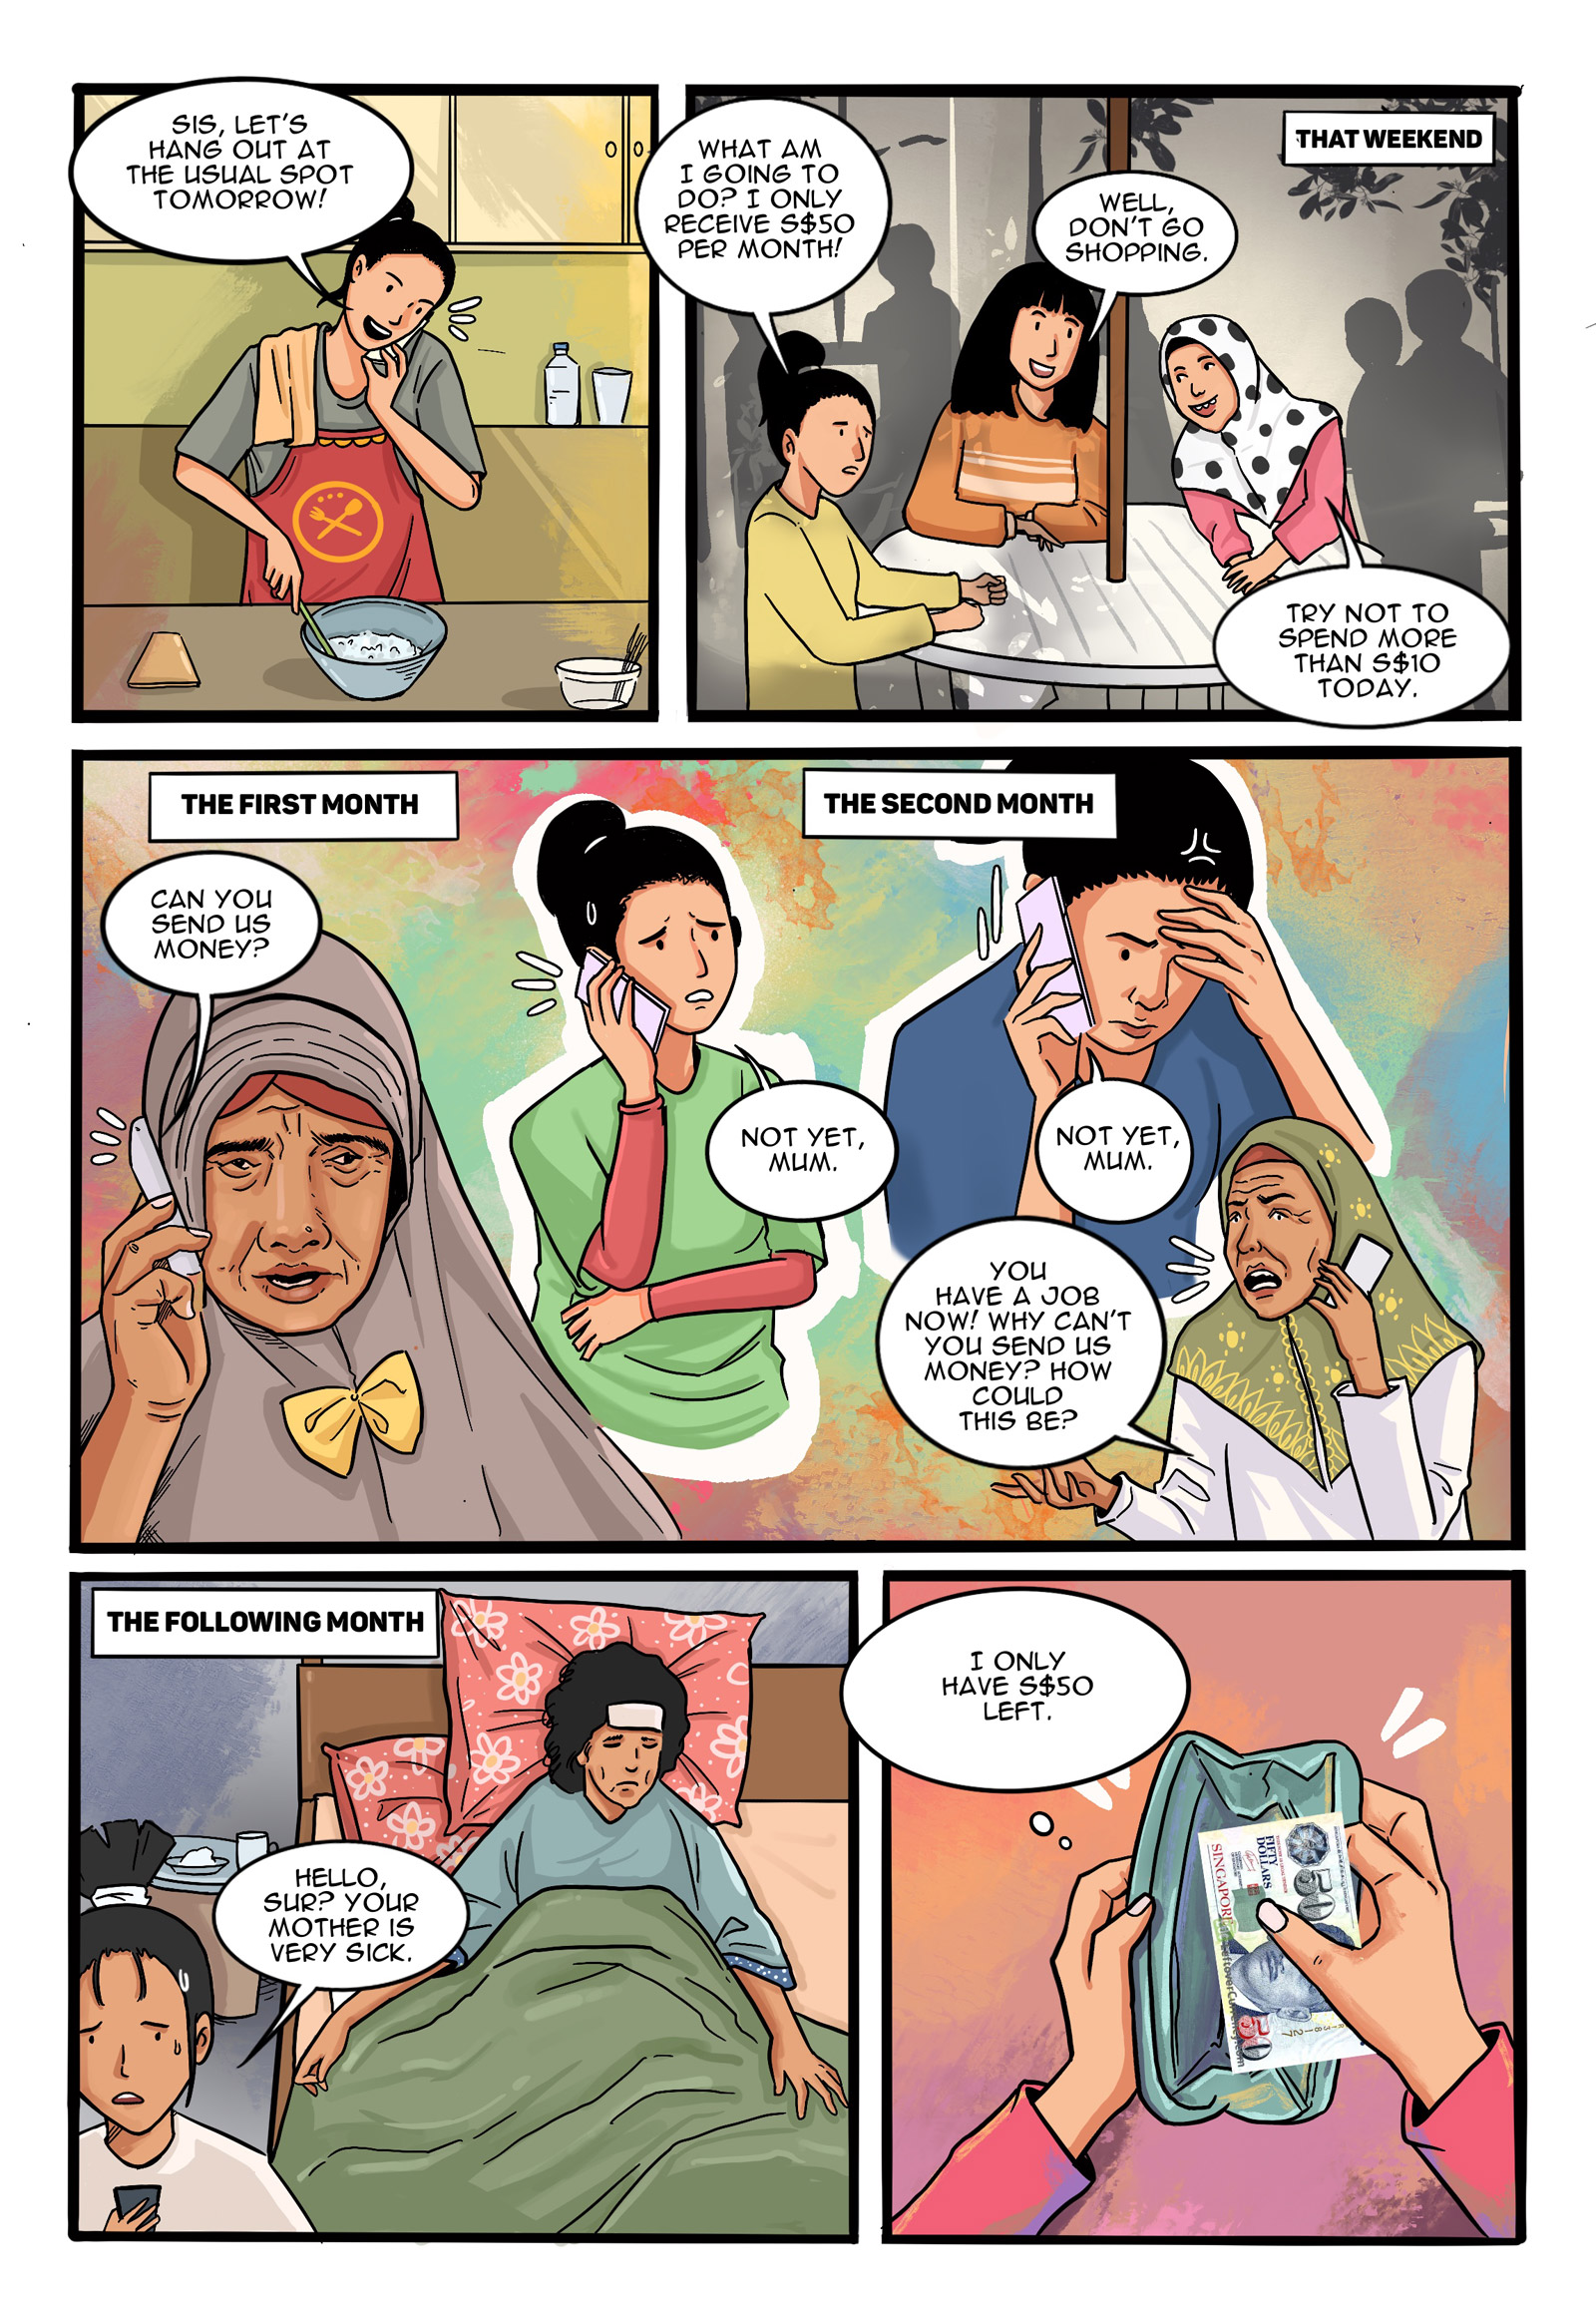 Page 8.
Panel 1. While working, Suryati calls her friends to meet on the weekend. Suryati: “Sis, let’s hang out at the usual spot tomorrow!”

Panel 2. Suryati meets her fellow domestic workers in public. Suryati: “What am I going to do? I only receive S$50 per month!” Friend #1: “Well, don’t go shopping.” Friend #2: “Try not to spend more than S$10 today.”

Panel 3. Suryati’s conversation with her mother on the phone. Mother: “Can you send us money?” Suryati: “Not yet, mum.” Mother: You have a job now! Why can’t you send us money? Piye tho? How could this be?”

Panel 4. Suryati’s mother’s condition in the following month. Family Member: “Hello, Sur? Your mother is very sick.”

Panel 5. Suryati: “I only have S$50 left.”
